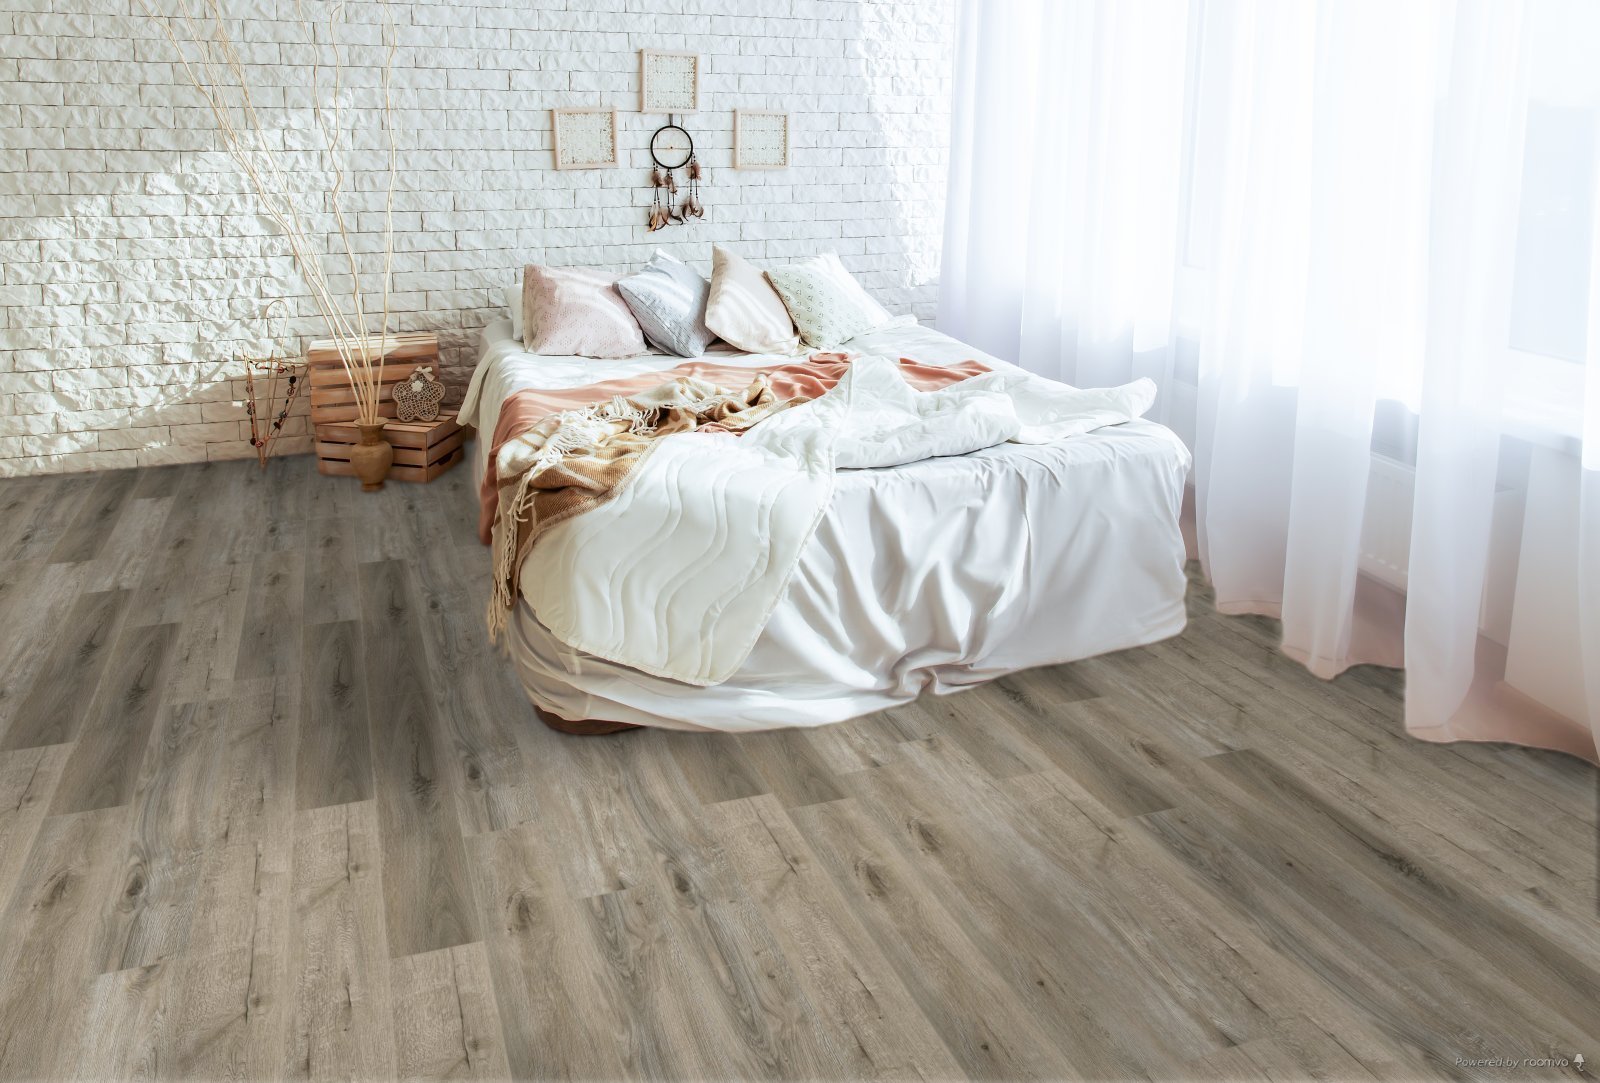 Horizen Flooring presents to you a picture of a quality wide plank Aspen Hollow luxury vinyl plank. NovoCore Premium EIR collection features a wide range of colors & designs that will compliment any interior. Natural wood grain synchronized surface allow for an authentic hardwood look & feel. This collection features a 0.25″ / 6.5 mm overall thickness and a durable 22 mil / 0.55 mm wear layer for residential and commercial applications.